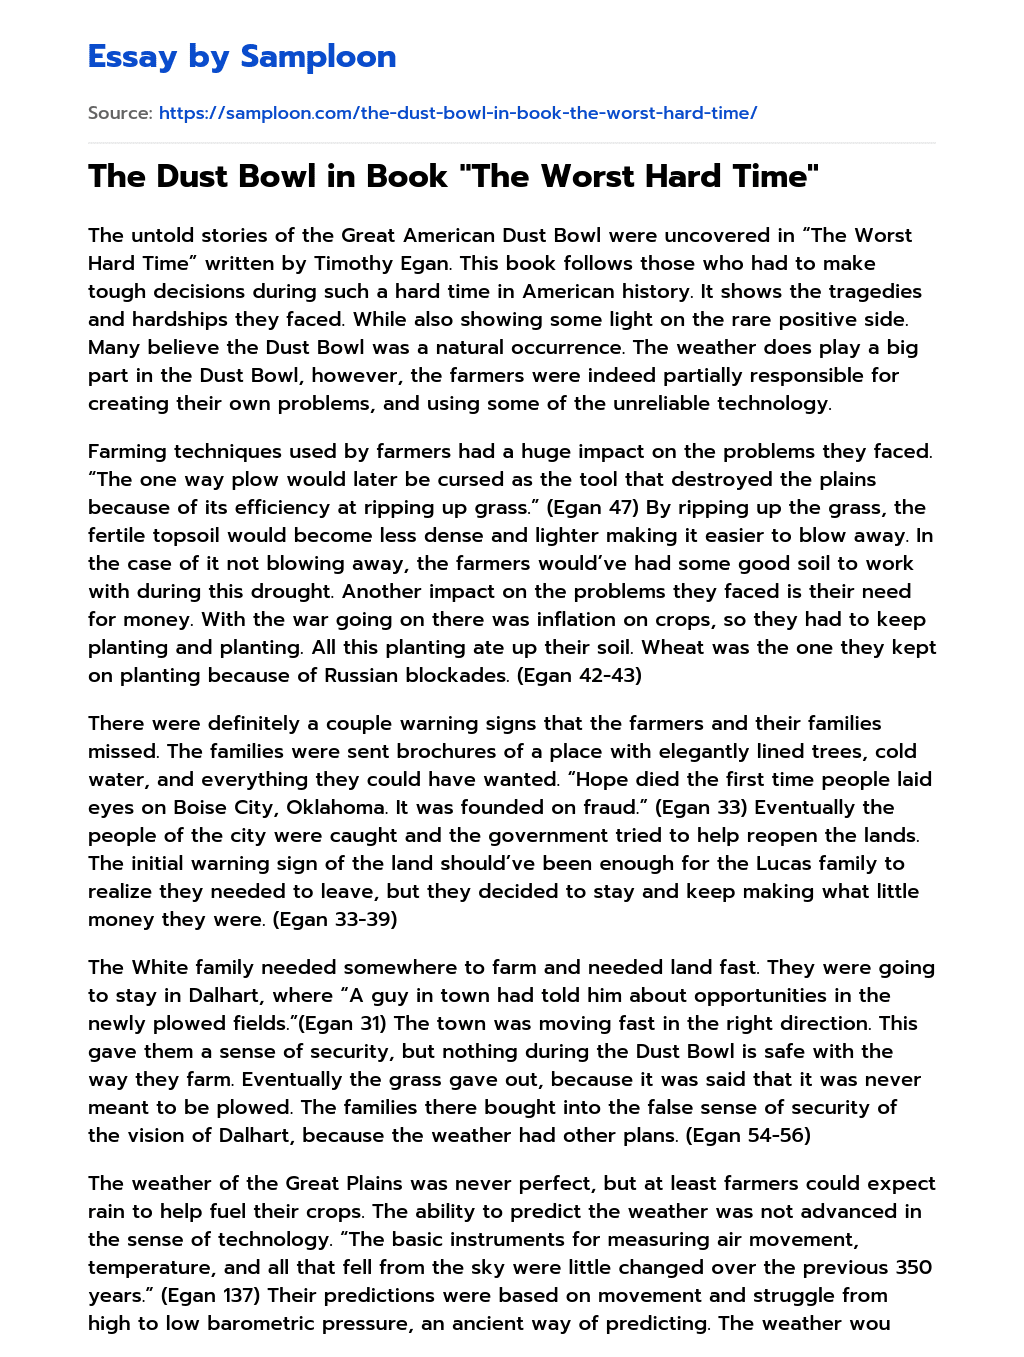 The Dust Bowl in Book “The Worst Hard Time” essay